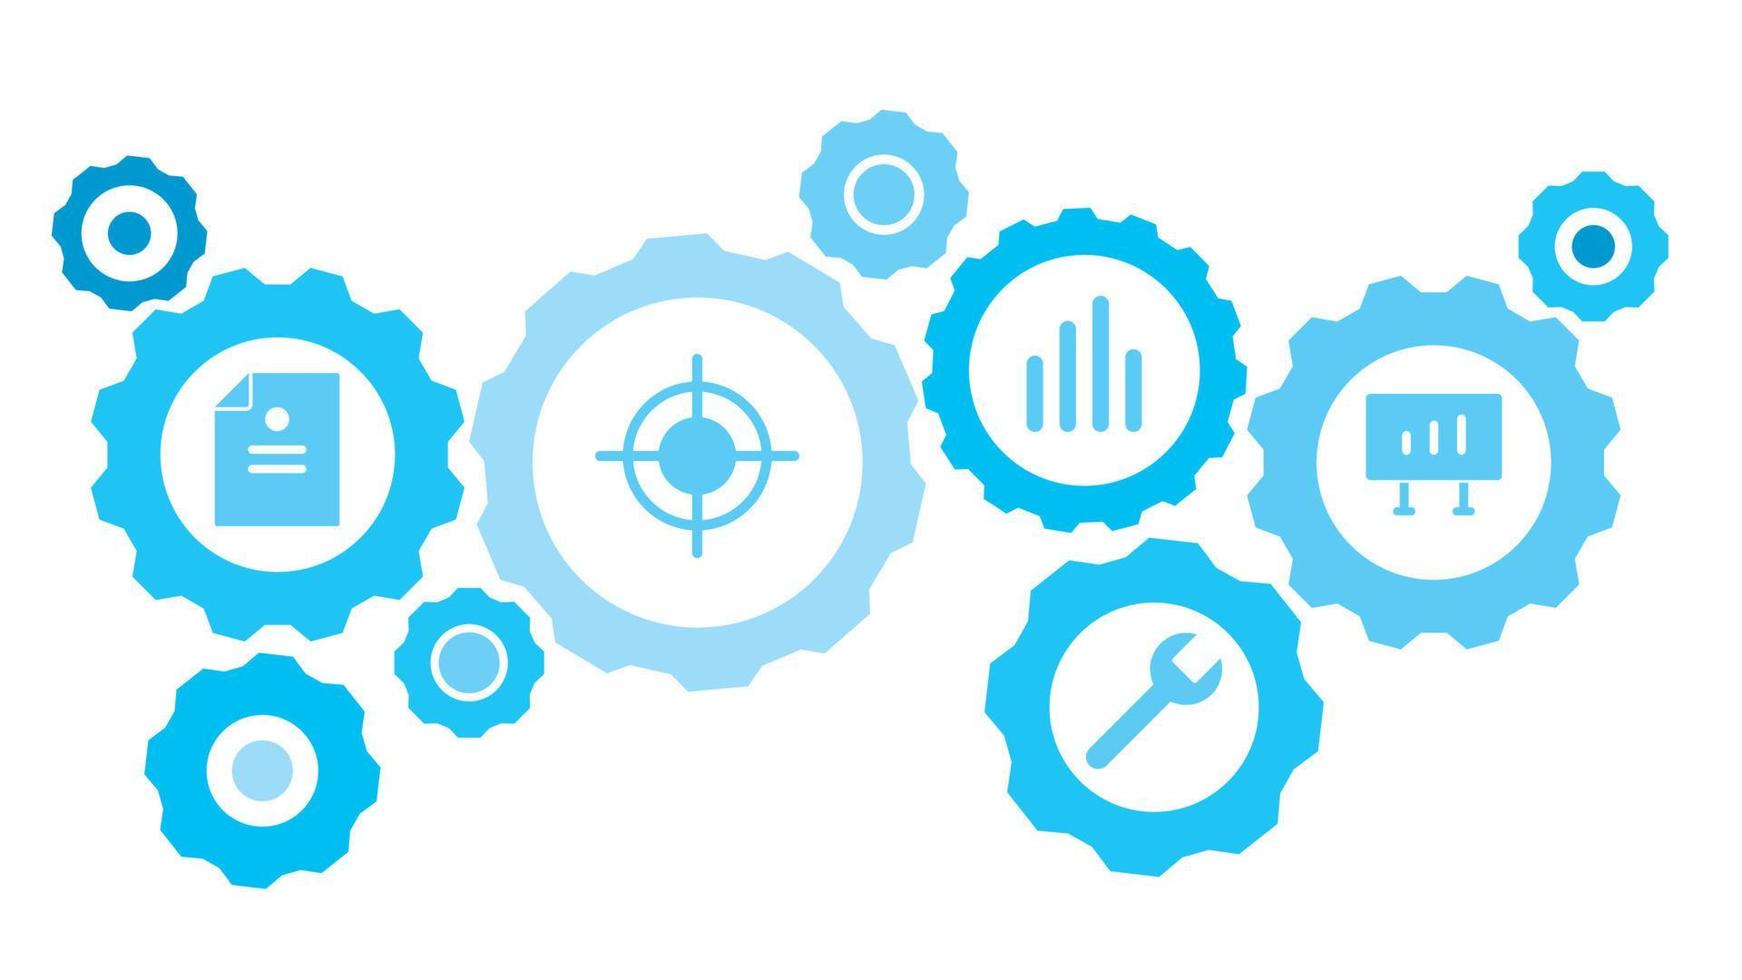 Connected gears and vector icons for logistic, service, shipping, distribution, transport, market, communicate concepts. analytics, diagram board gear blue icon set on white background